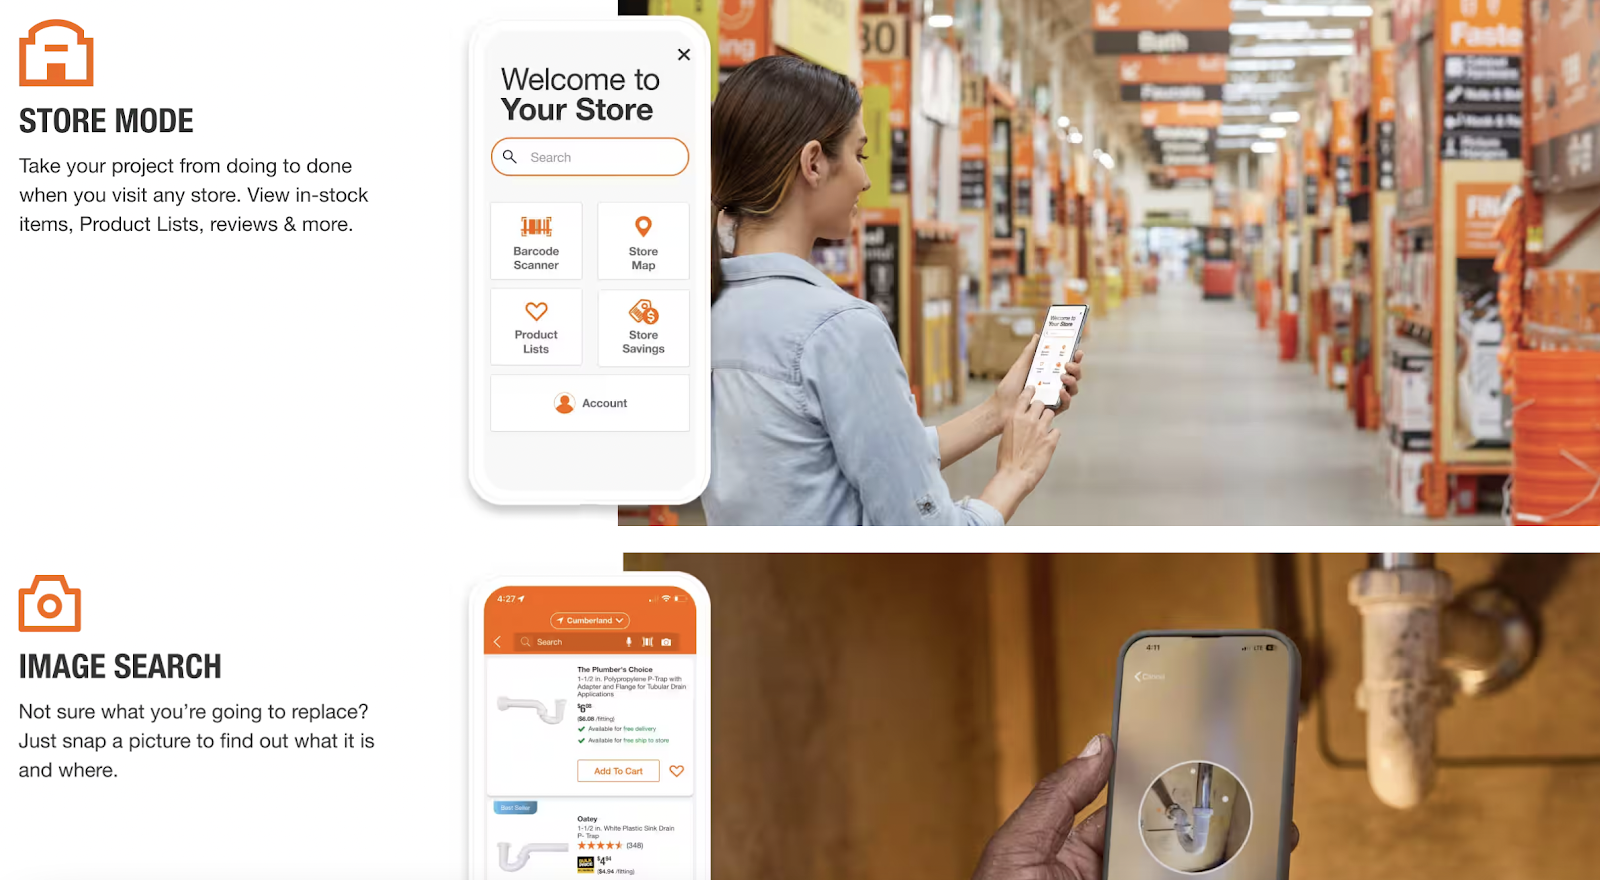 Home Depot Omnichannel experience